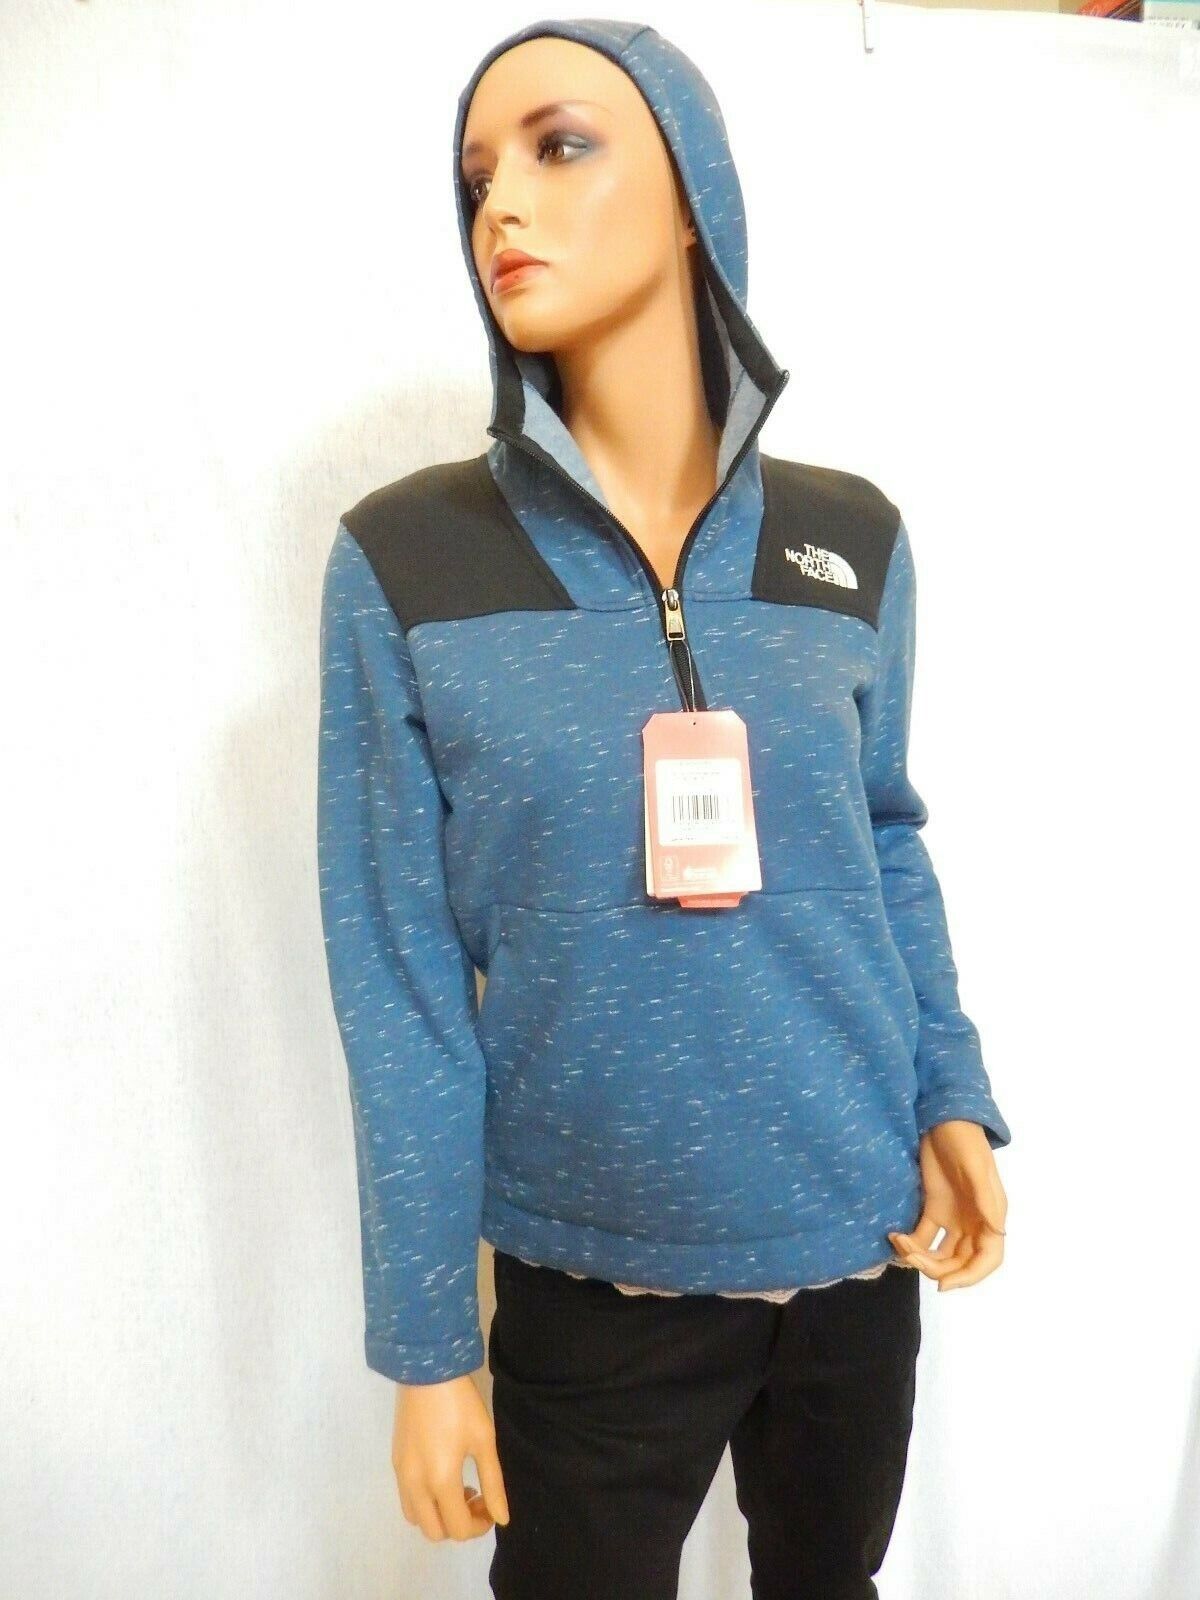 *NWT* $65 The North Face Boys Linton Peak Anorak Jacket Blue Hooded Size M